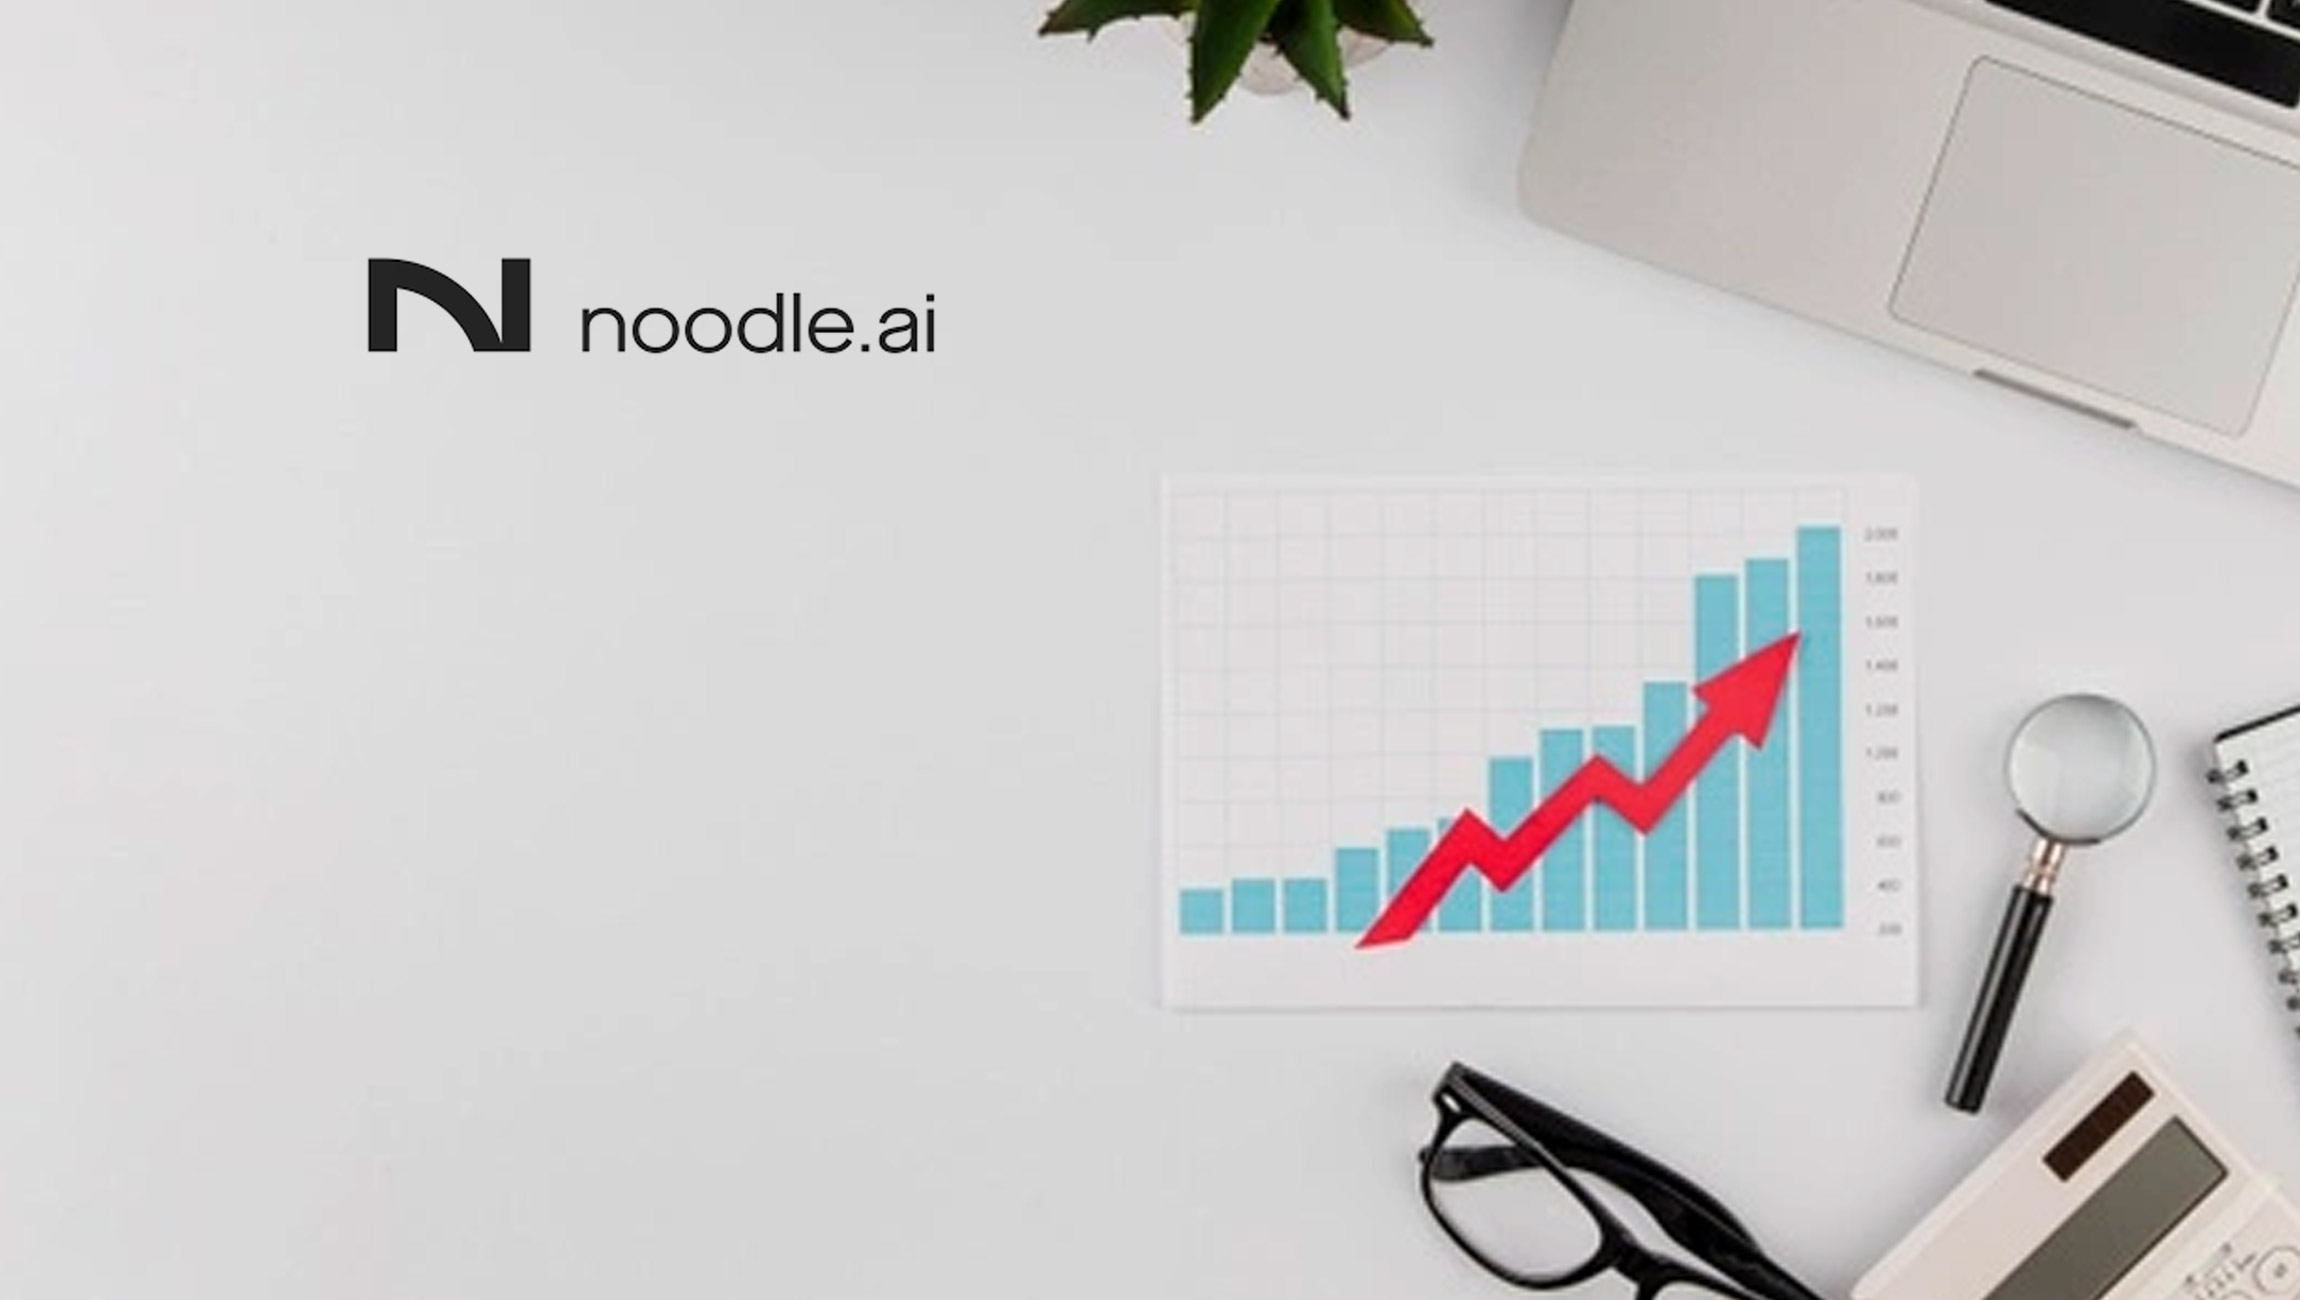 Noodle.ai Named As One of The Fastest-Growing Companies in North America on Deloitte's 2021 Technology Fast 500™